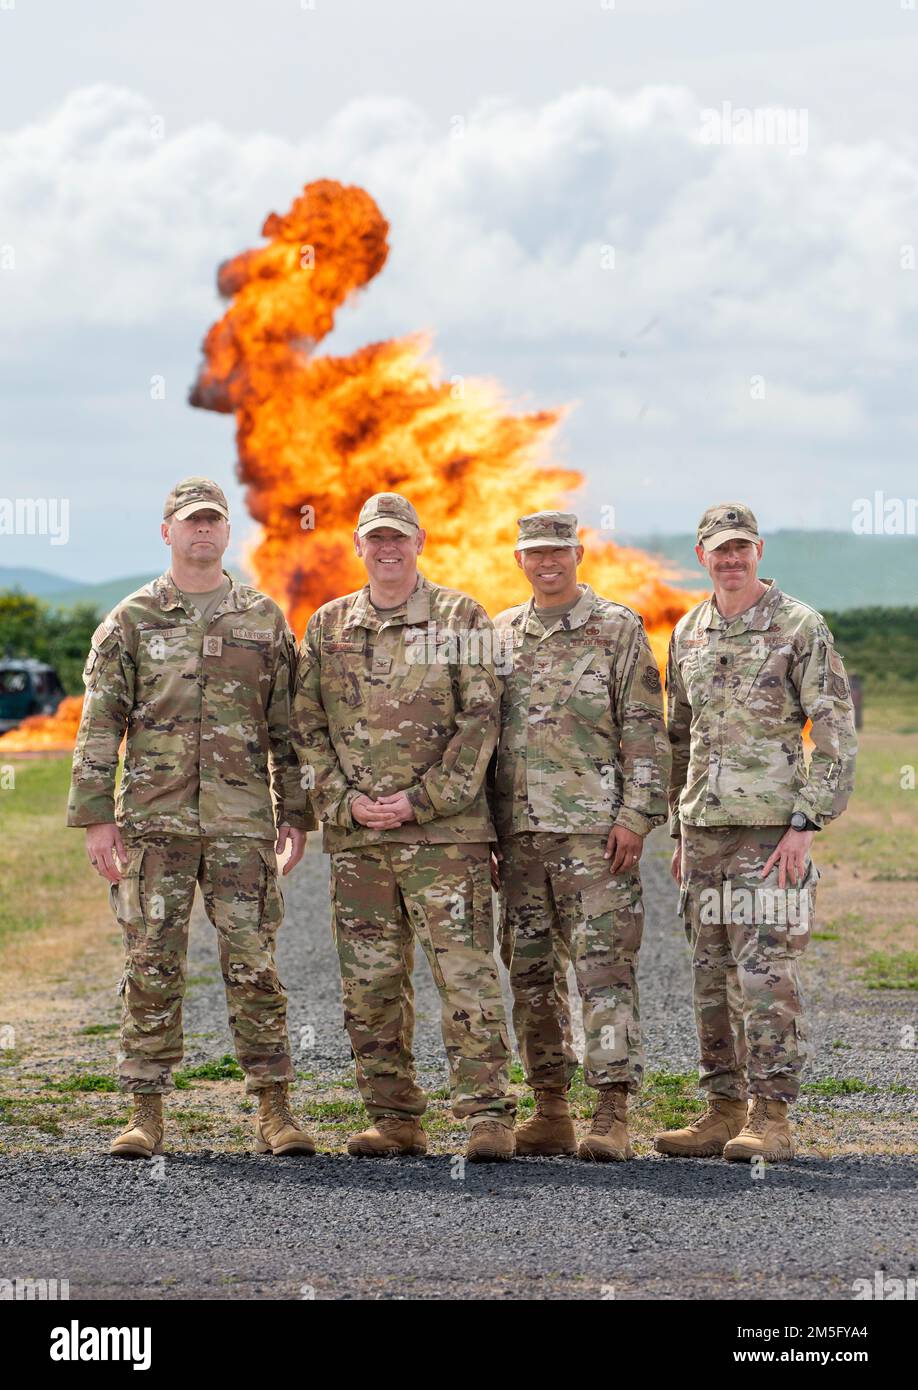 From left to right, U.S. Air Force Chief Master Sgt. Keith Scott, 60th Air Mobility Wing command chief, Col. Corey Simmons, 60th AMW commander, Col. Melvin Maxwell, 60th Mission Group commander and Lt. Col. Clint Townsend, 60th Civil Engineer Squadron commander, participate in a controlled Explosive Ordnance Disposal demonstration at Travis Air Force Base, California, March 15, 2022. Trained to detect, disarm and dispose of explosive threats in extreme environments, EOD technicians serve as the Air Force’s bomb squad. Stock Photo